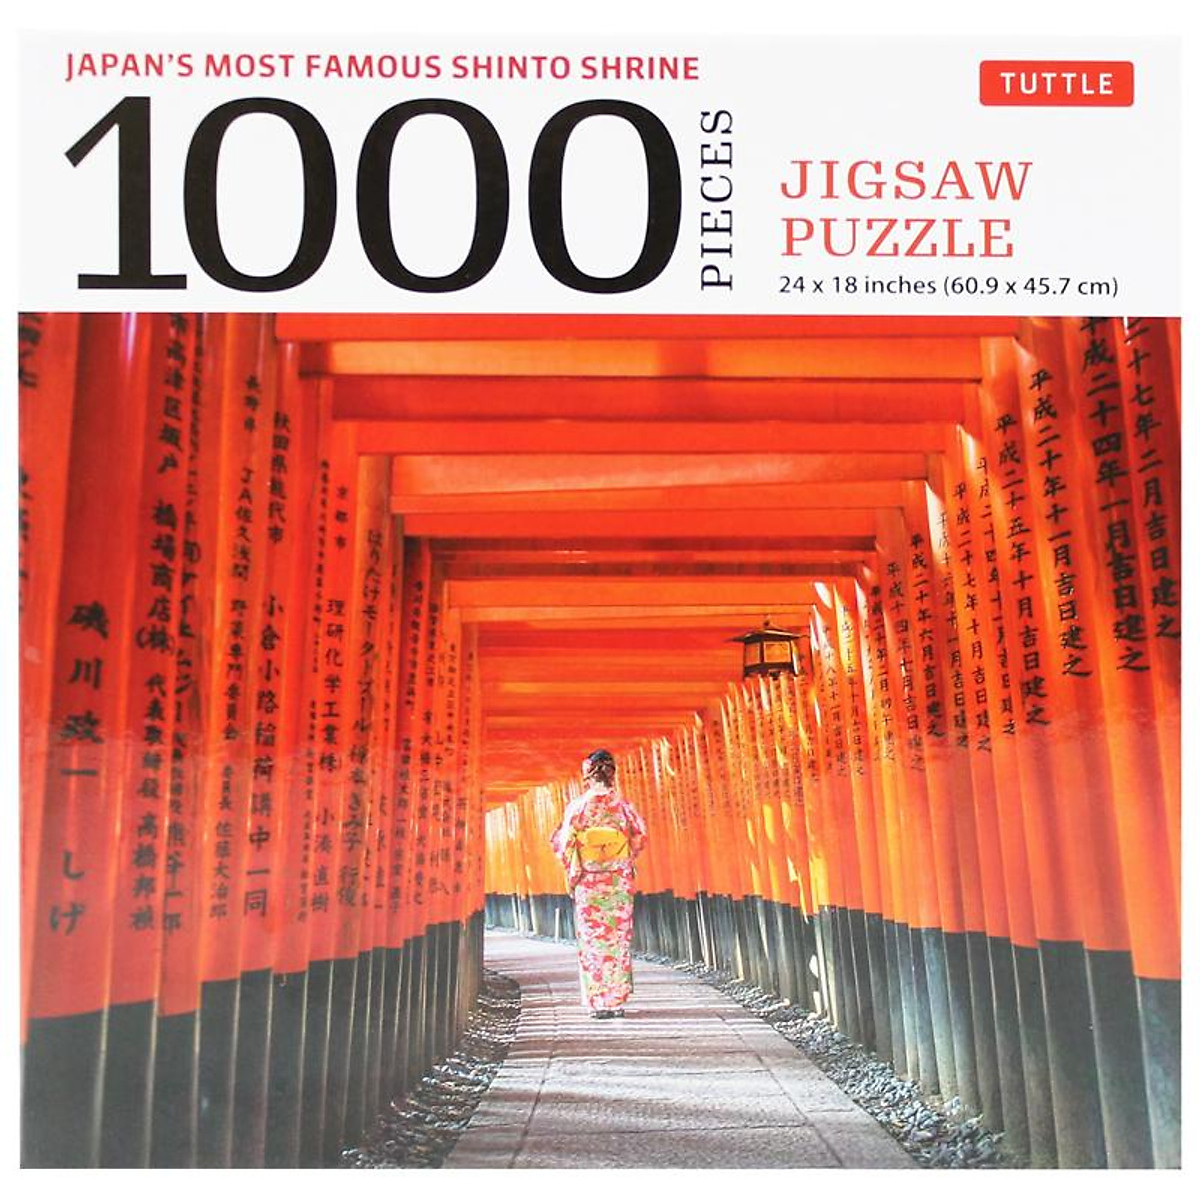 Japan's Most Famous Shinto Shrine - 1000 Piece Jigsaw Puzzle: Fushimi Inari Shrine In Kyoto: Finished Size 24 x 18 inches (61 x 46 cm)